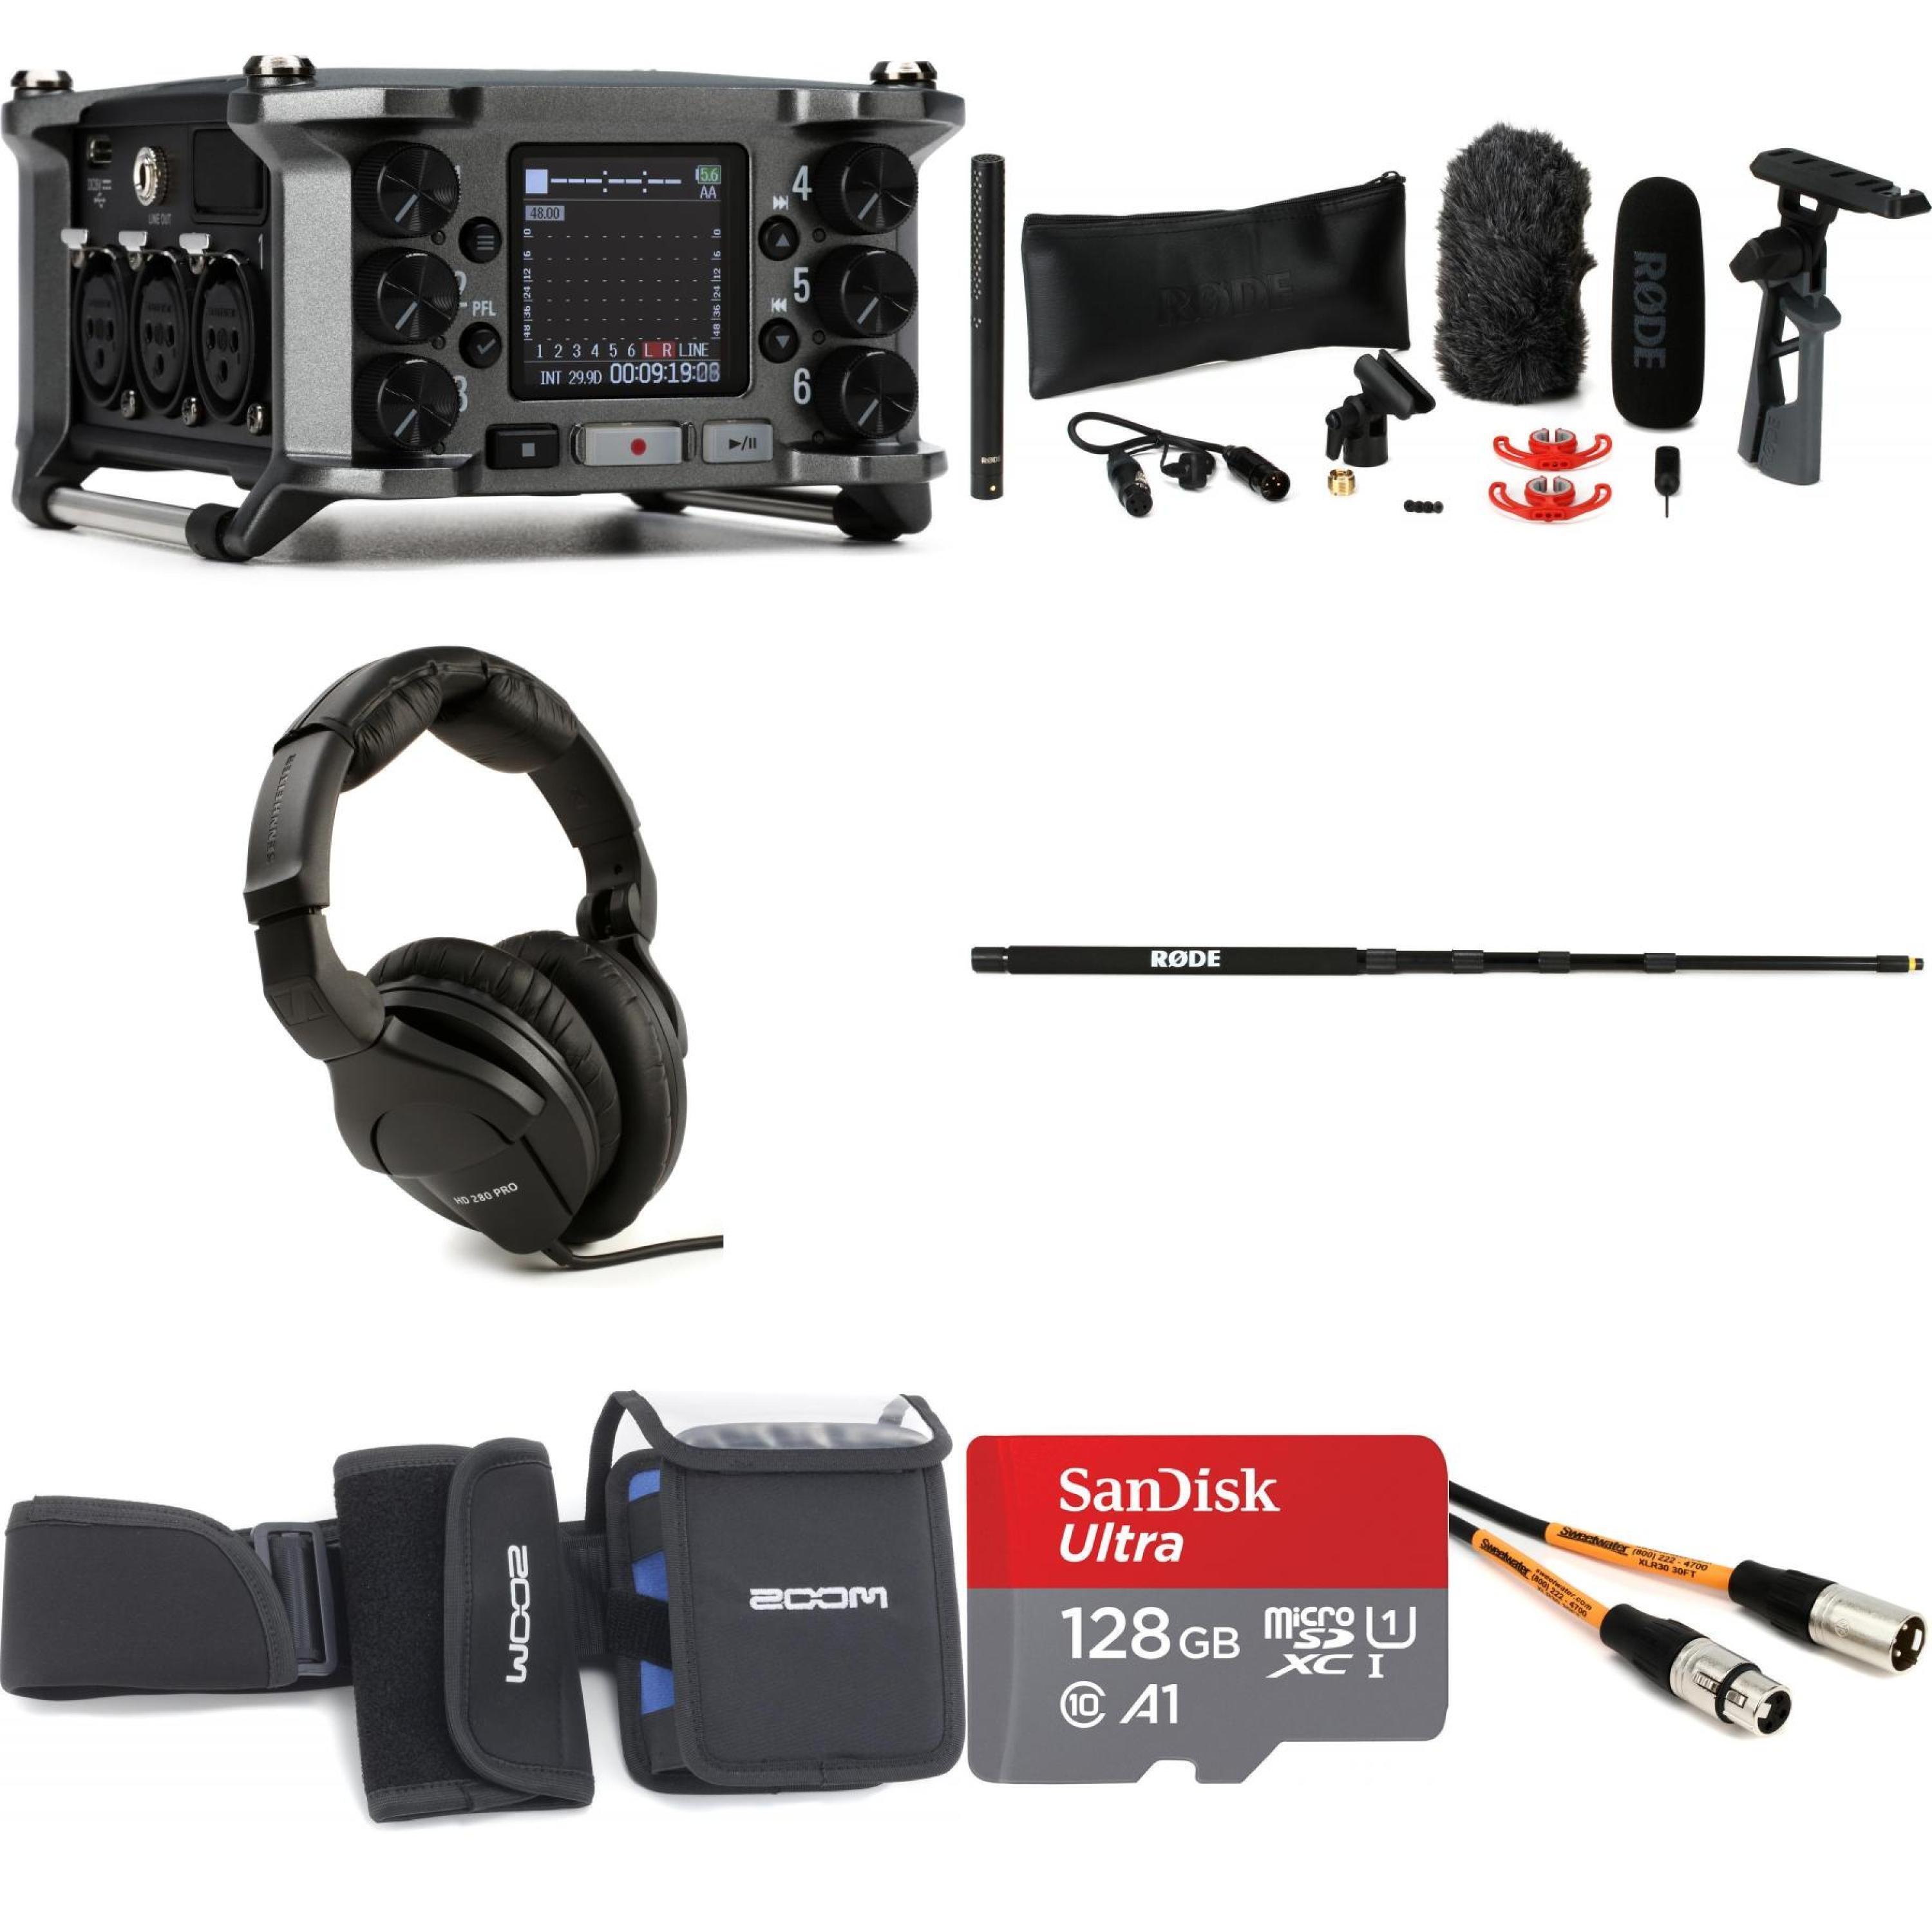 Zoom F6 Multitrack and Rode NTG5 Field Recording Bundle | Sweetwater